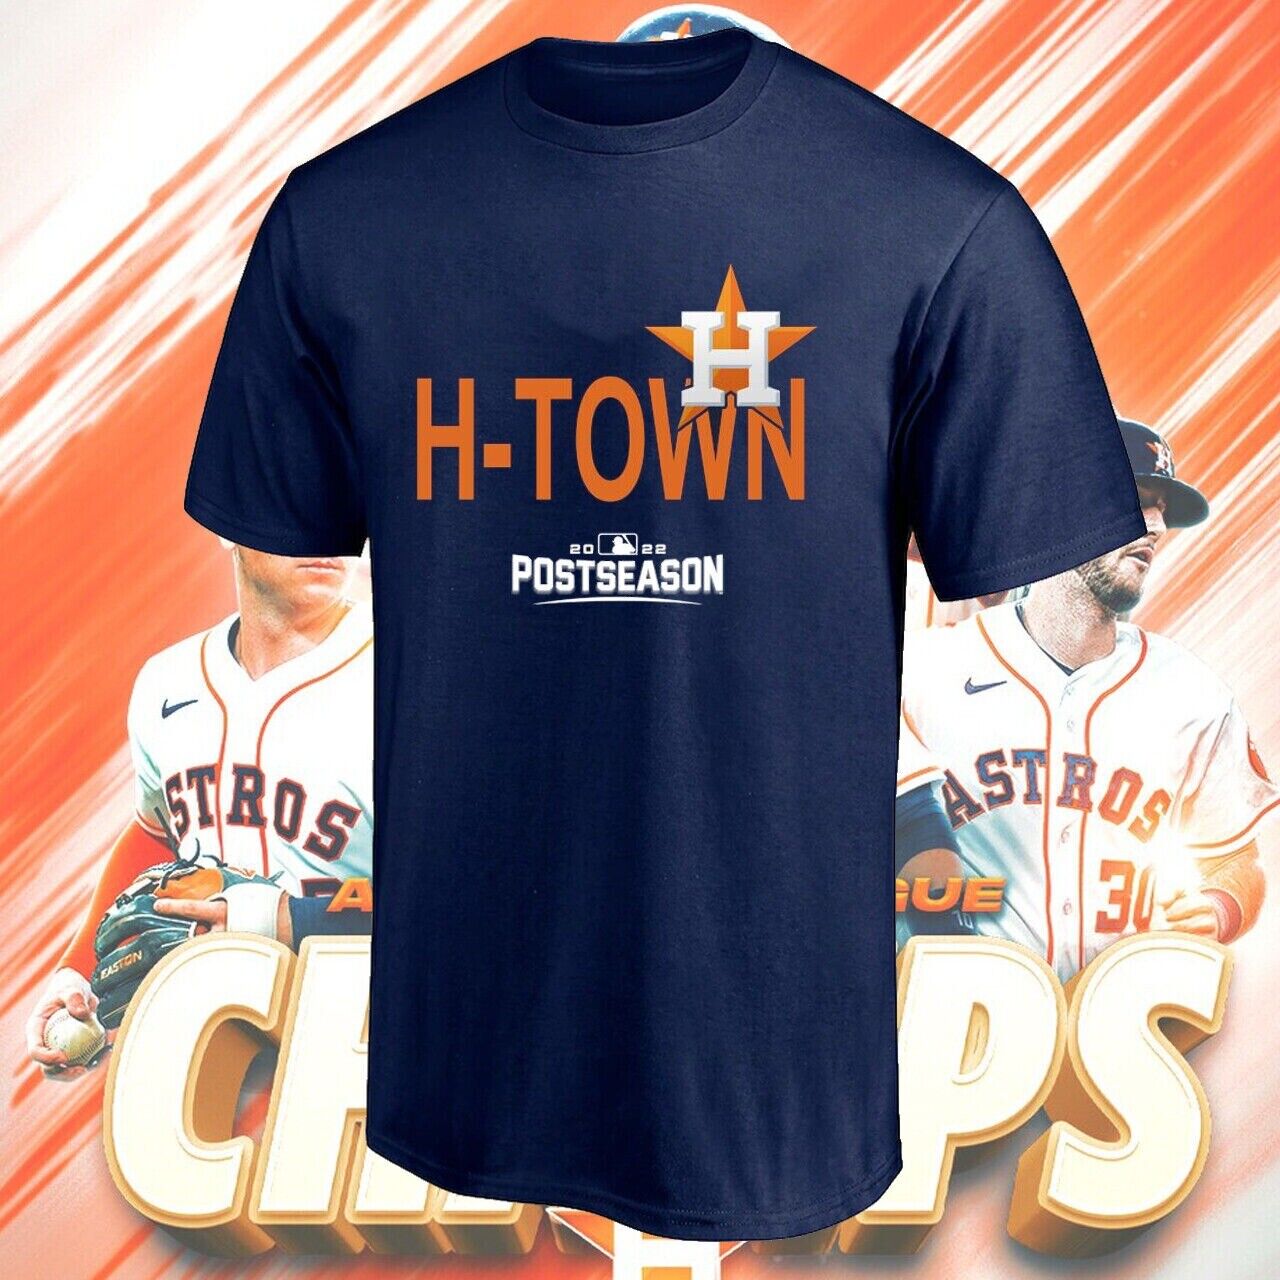 Houston Astros 2022 Finals Baseball Team Champs Unisex T-shirt S-4xl Plus Size Up To 5xl